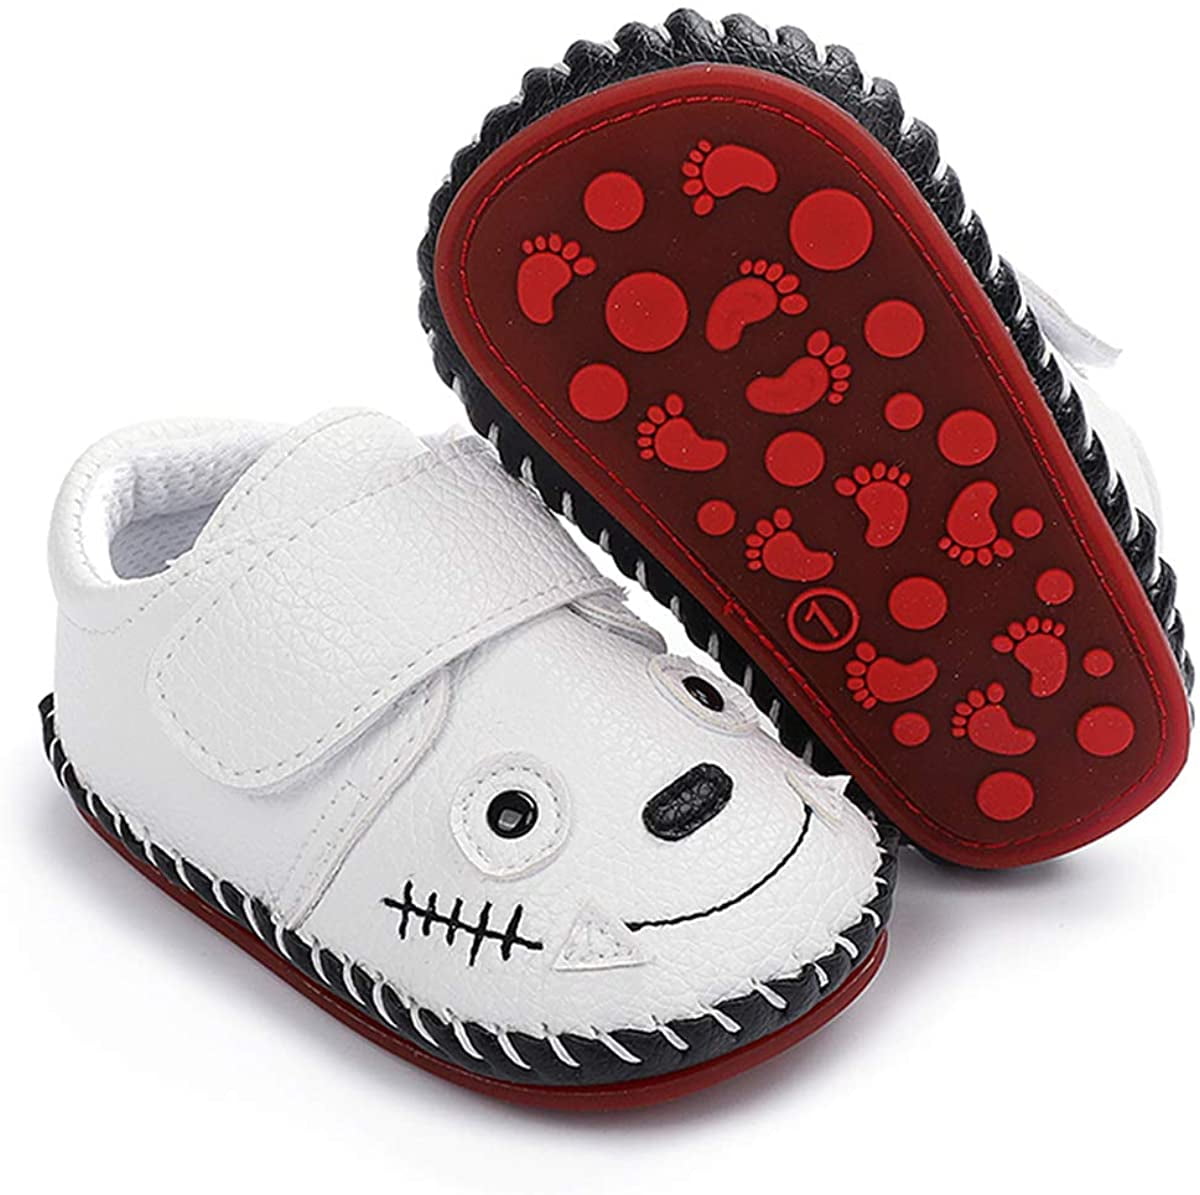 ENERCAKE Baby Boys Girls Shoes Non Skid Slippers Infant Sneakers Moccasins Toddler First Walkers House Newborn Walking Shoes 